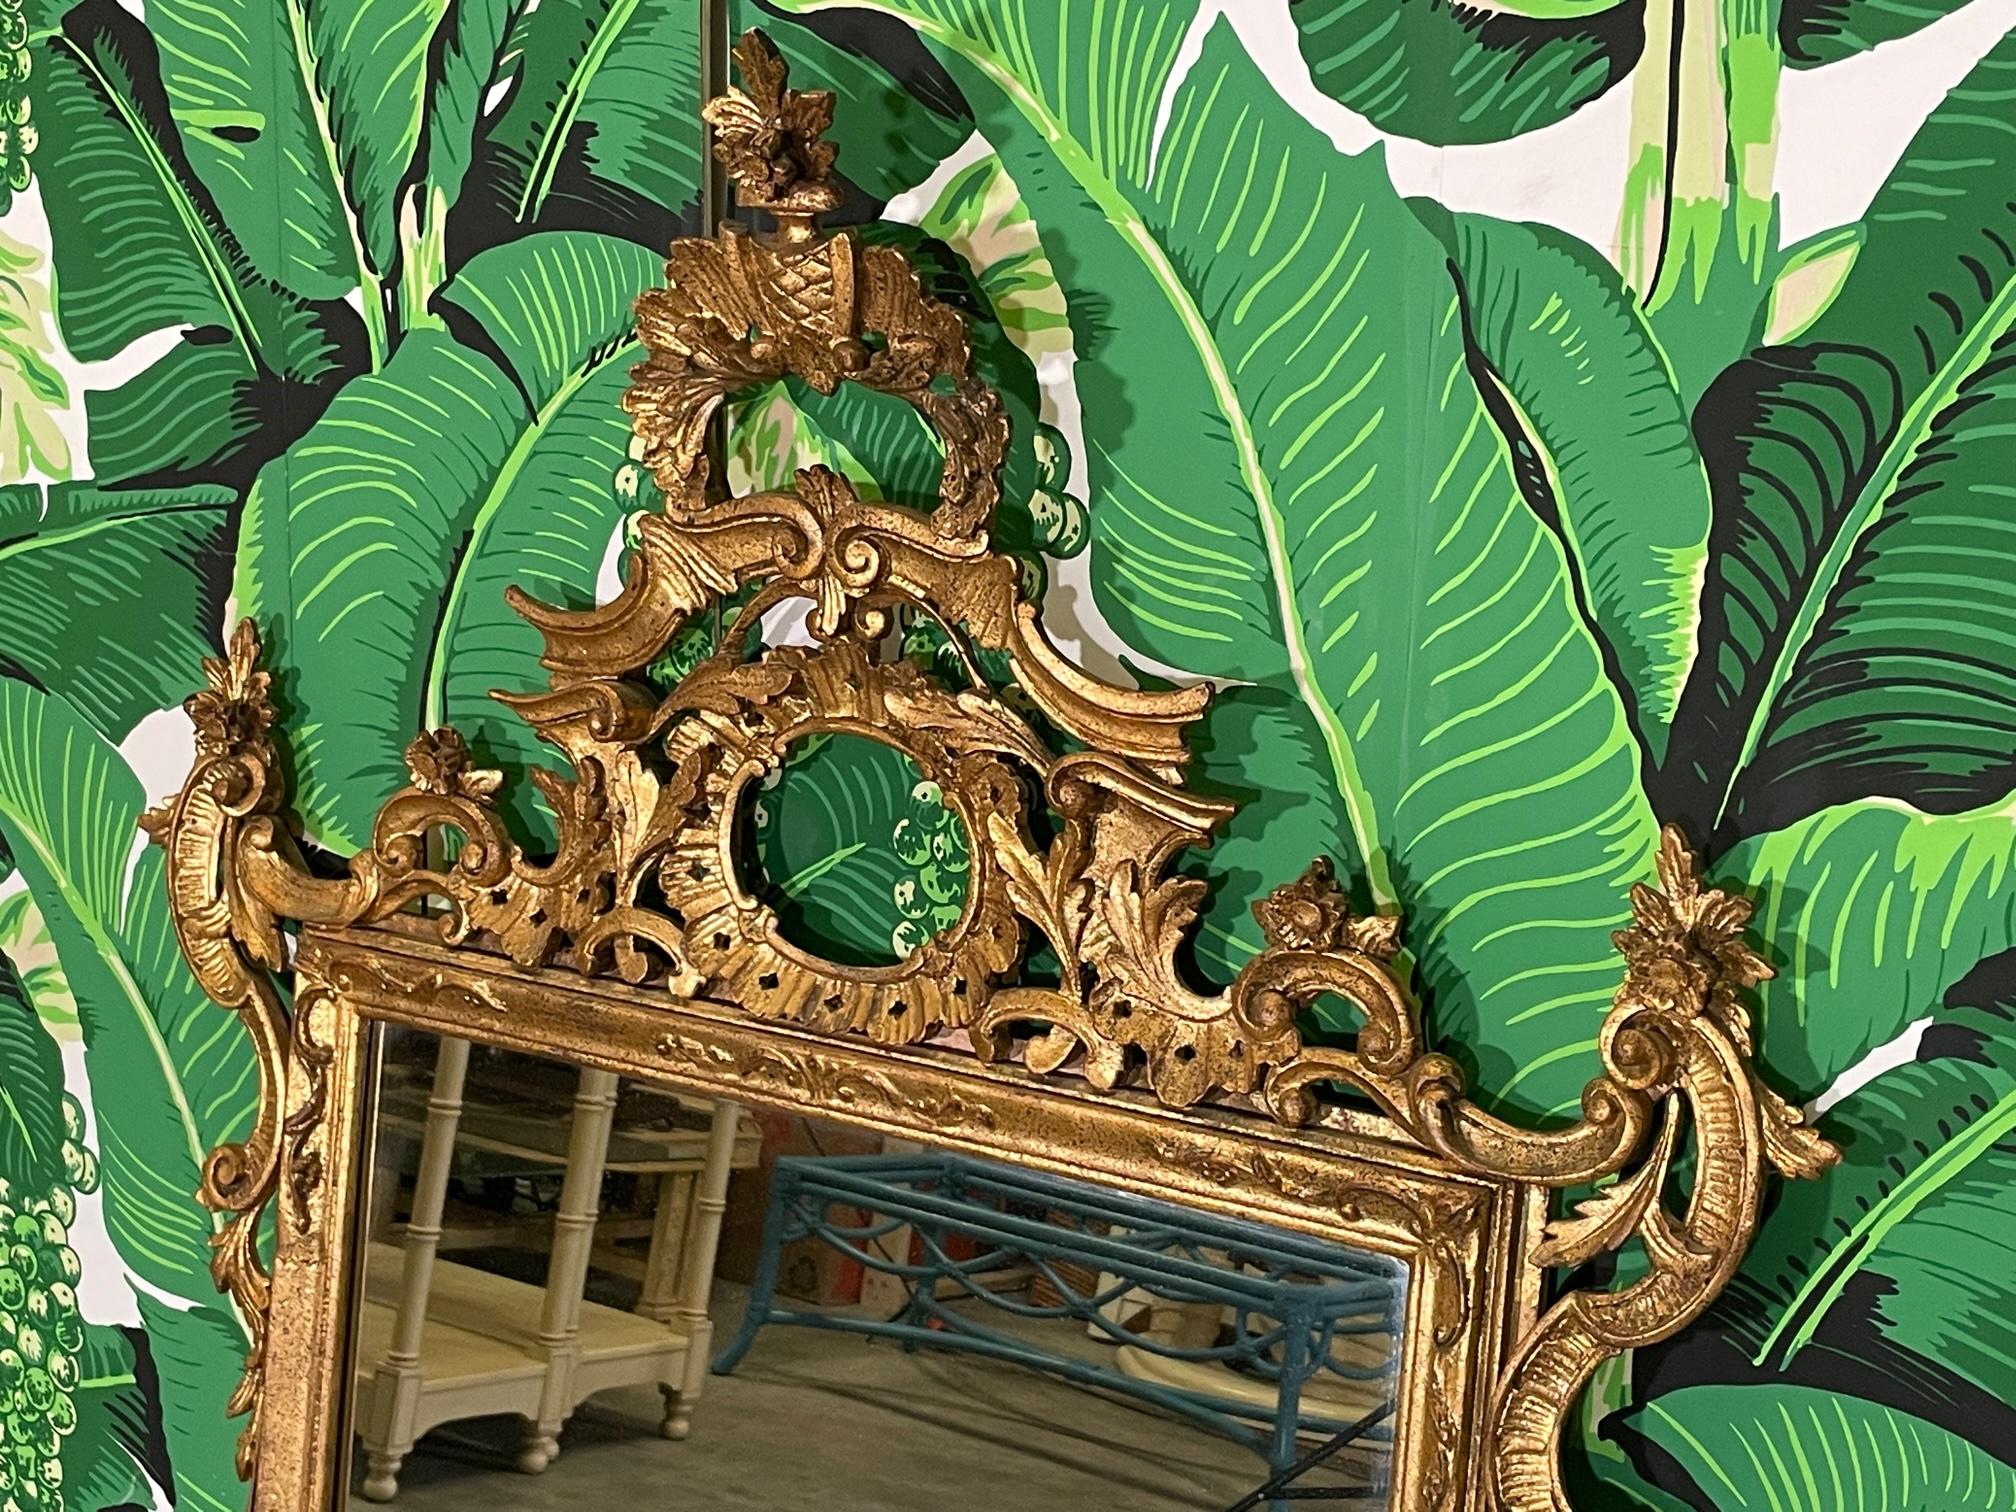 Large Rococo style wall mirror features original gold gilding and an open carved frame with flowers and scrolling acanthus leaves. Marked with Italy tag. Good condition with imperfections consistent with age, see photos for condition details.
For a